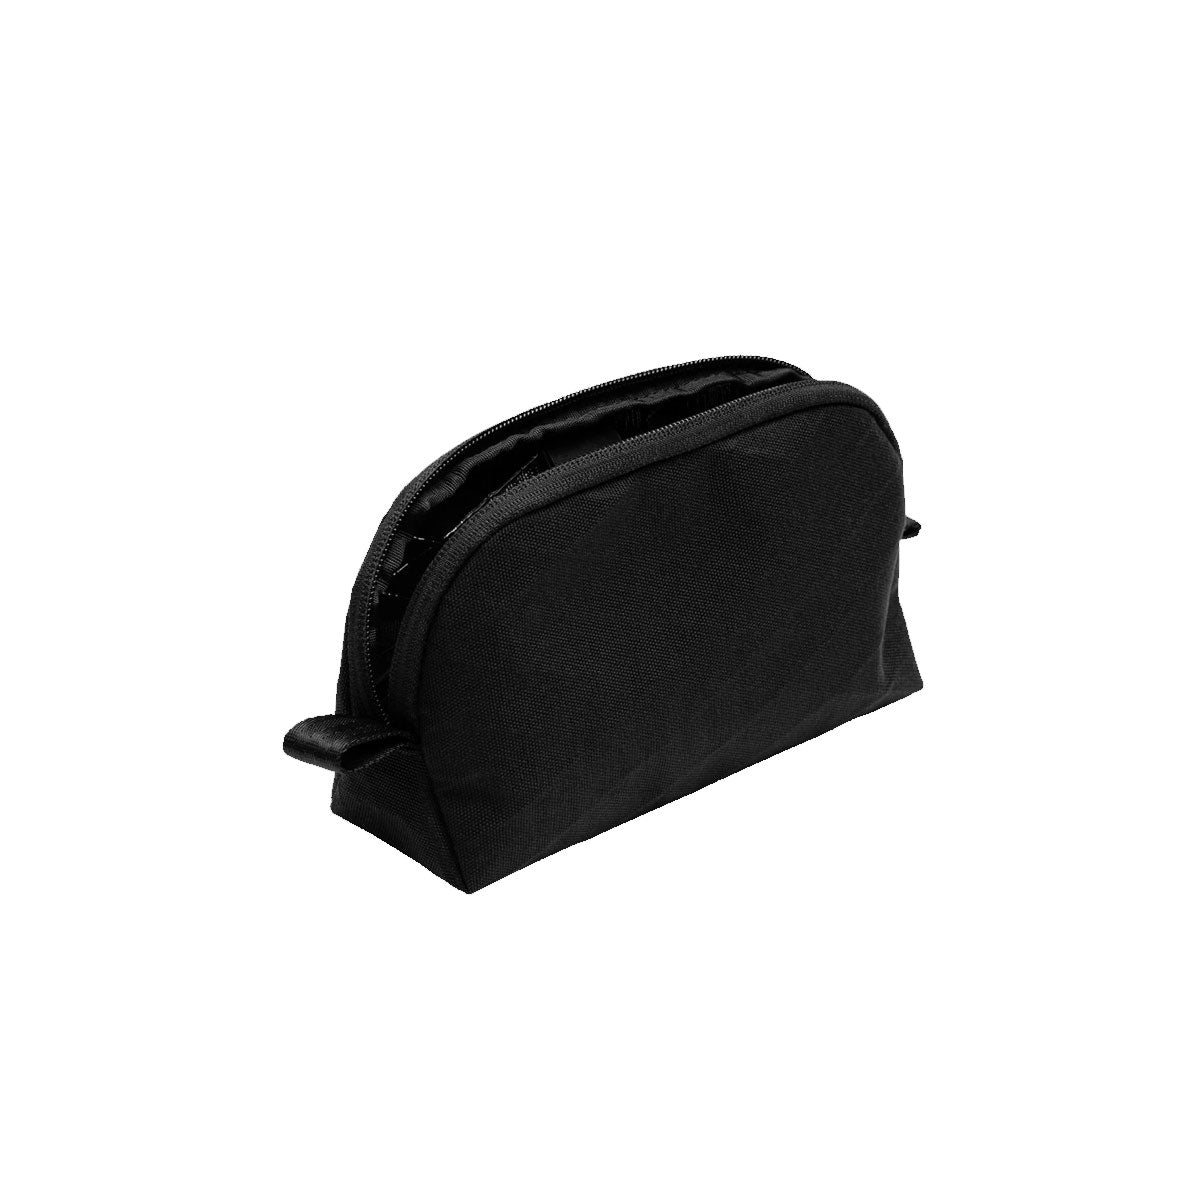 Able Carry : The Daily Stash Pouch : XPAC Deep Black